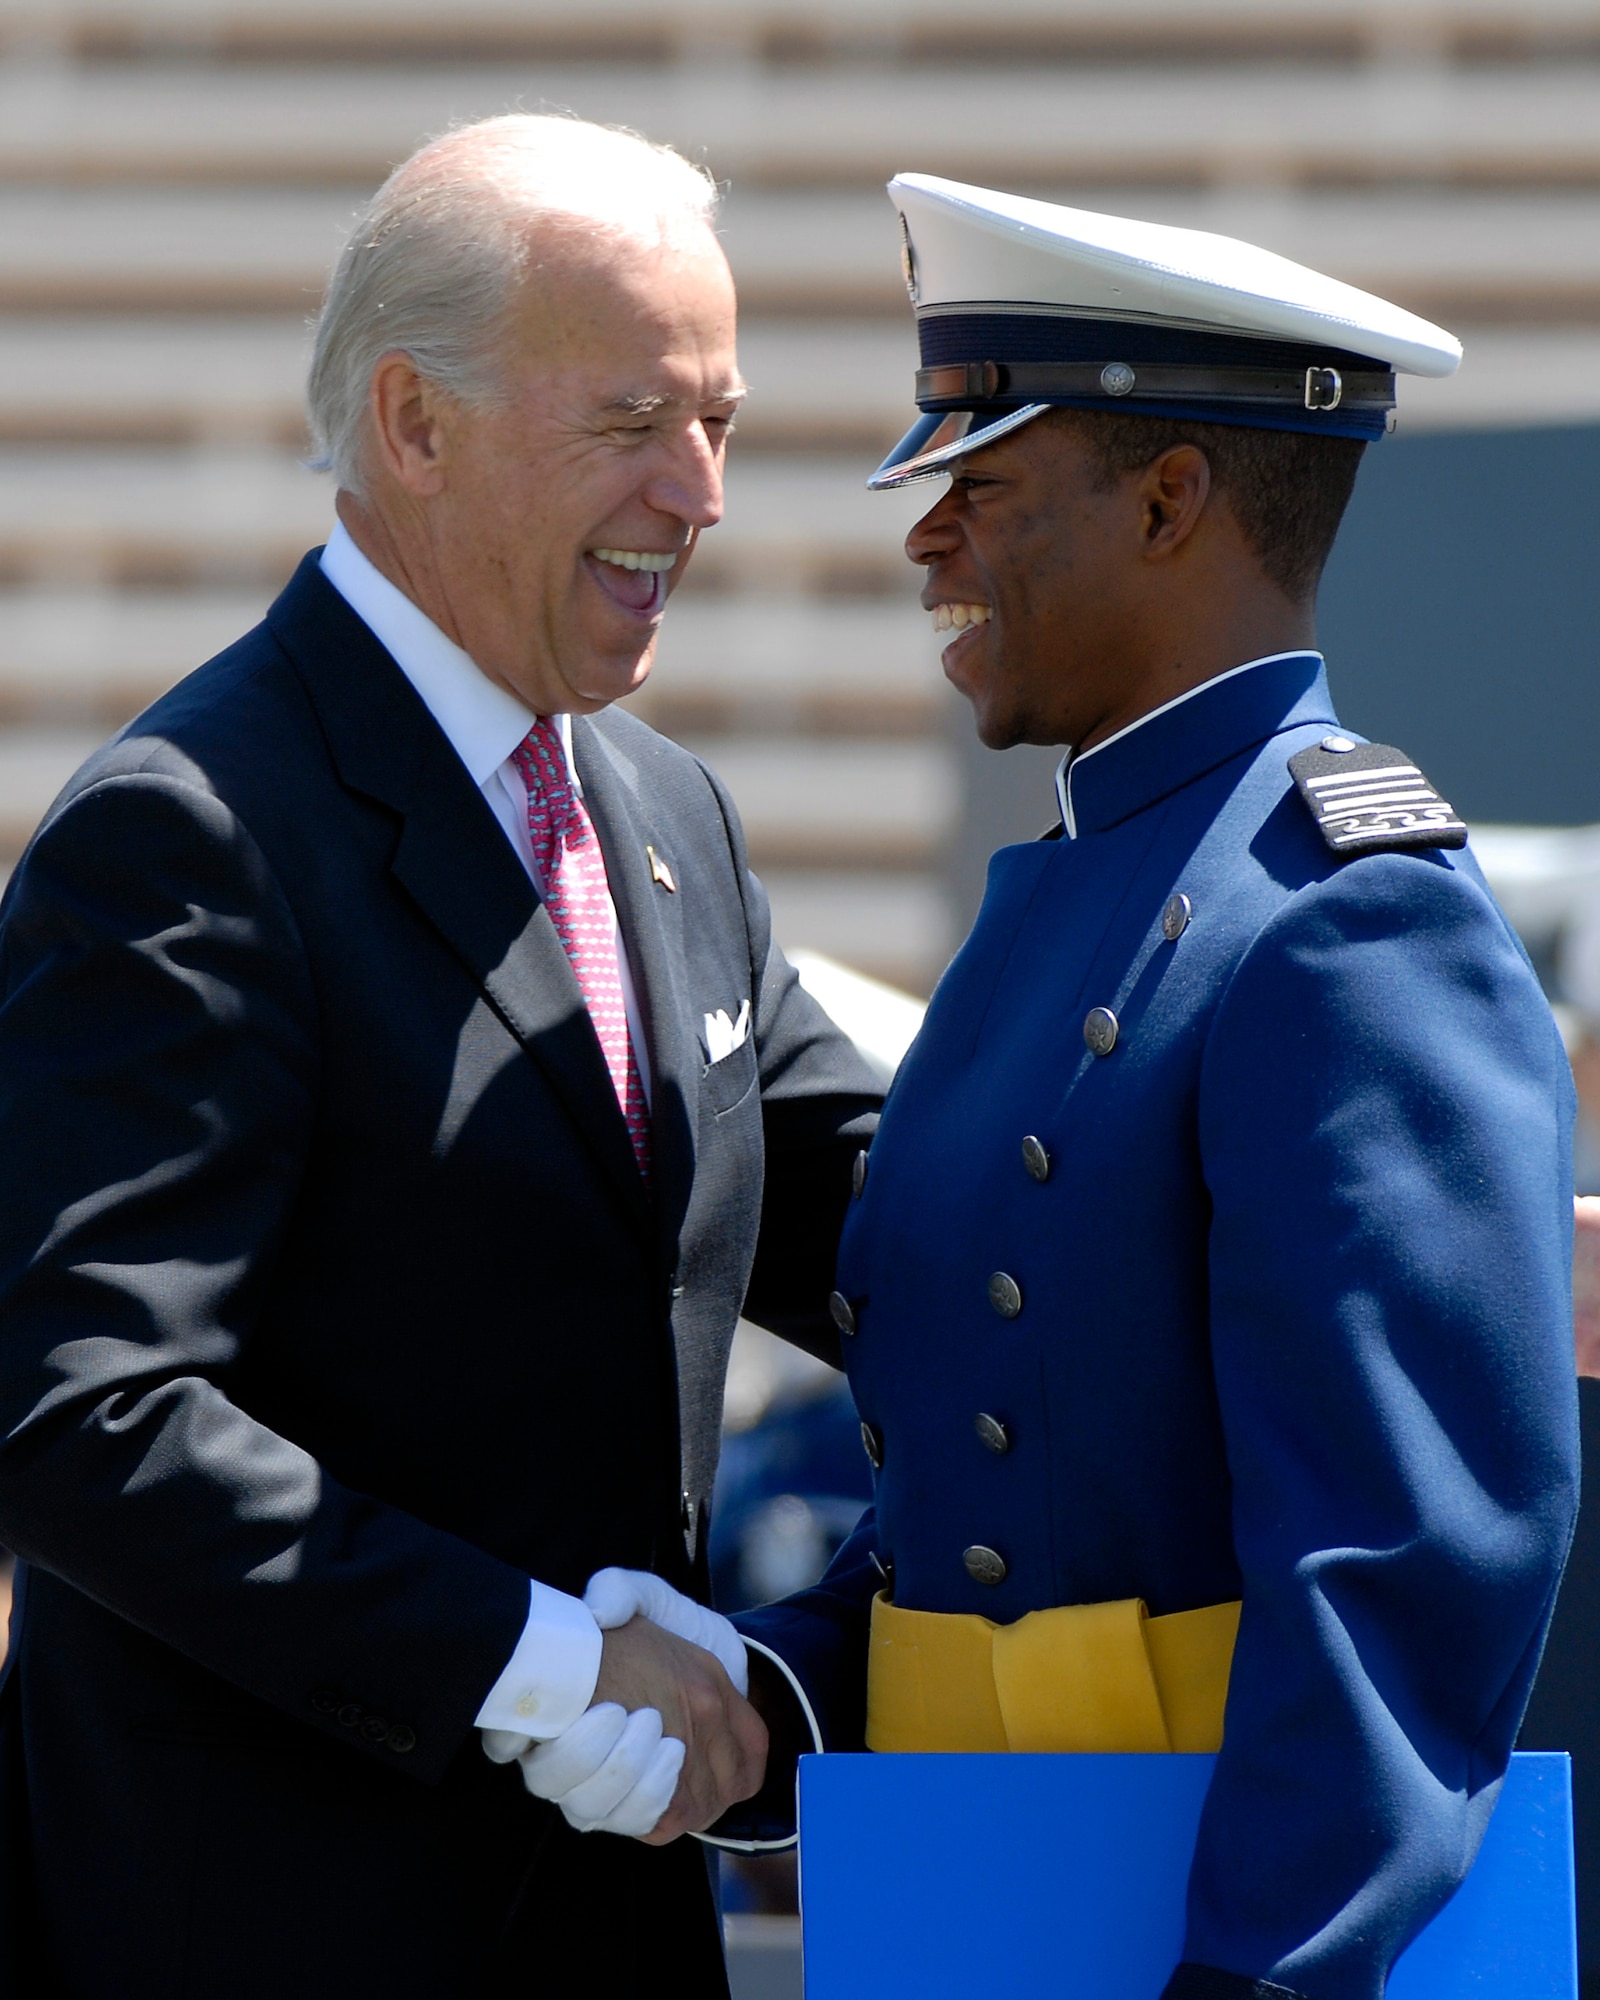 Vice President Joe Biden congratulates newly commissioned 2nd Lt. Kellen Curry during the U.S. Air Force Academy Class of 2009 graduation ceremony held at Falcon Stadium May 27. (U.S. Air Force photo/Mike Kaplan)